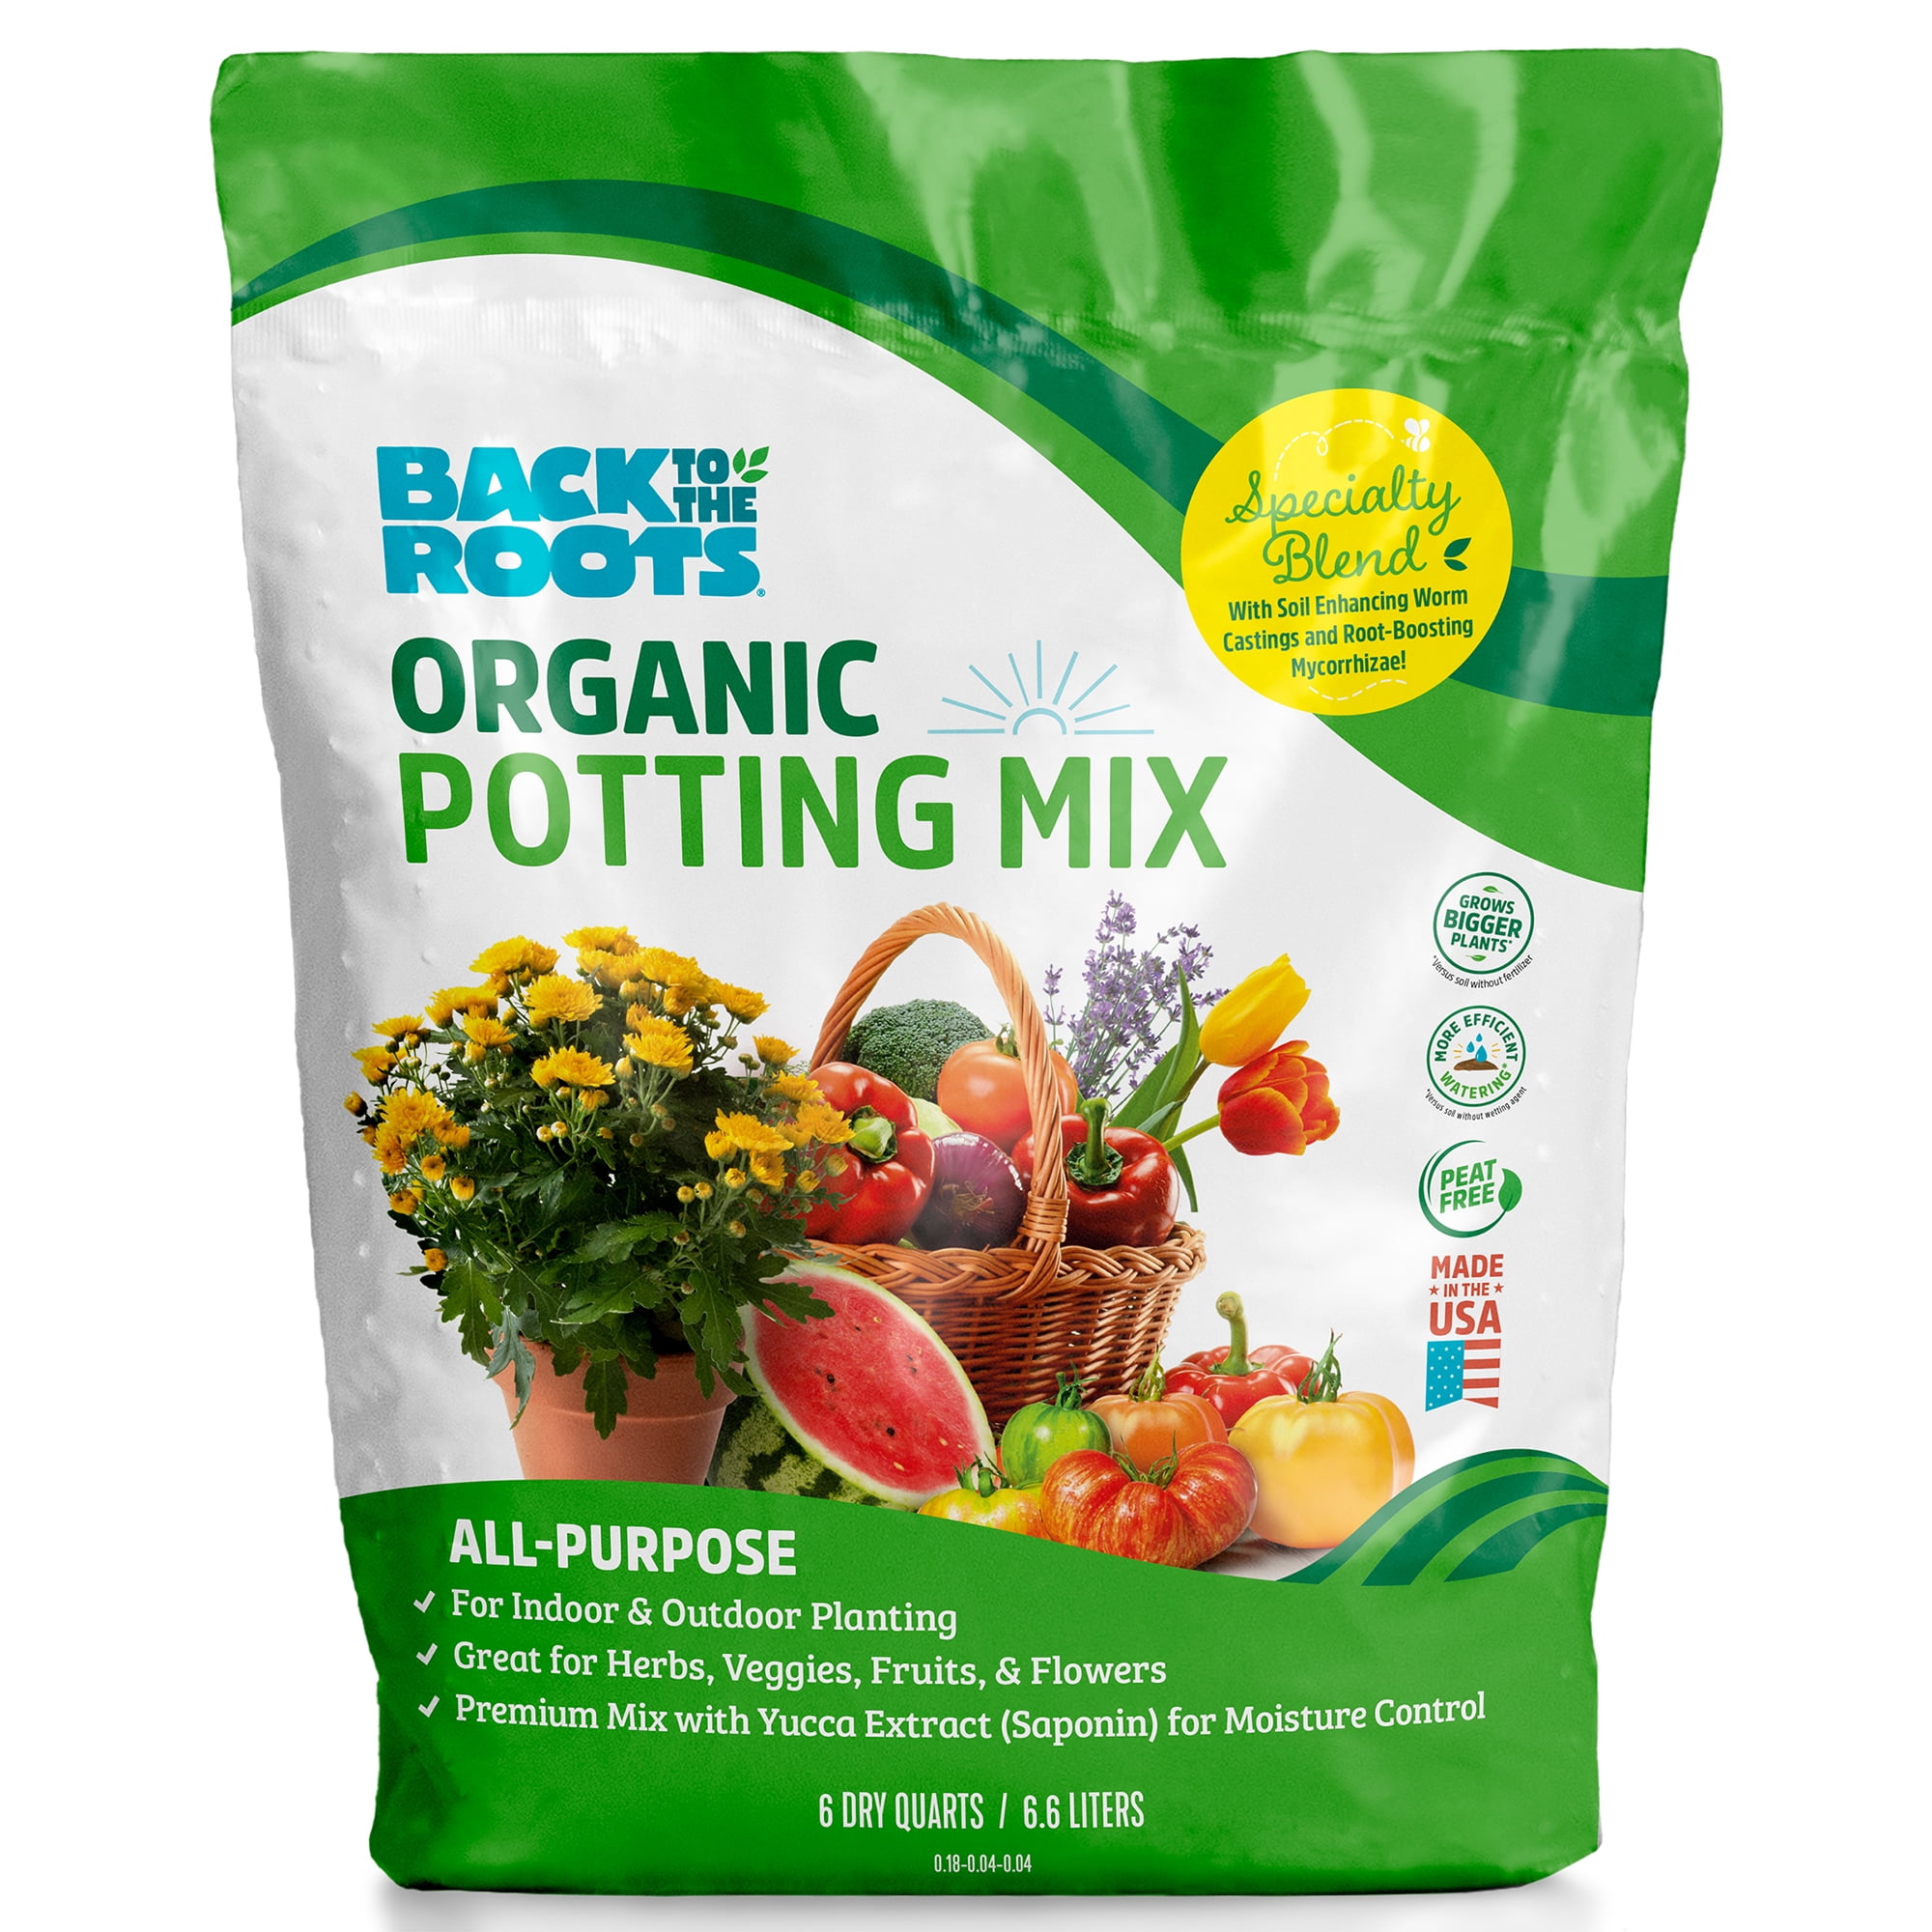 Potting Soil Mix - 500kg - A Perfect Mix for Gardening with All Nutrients